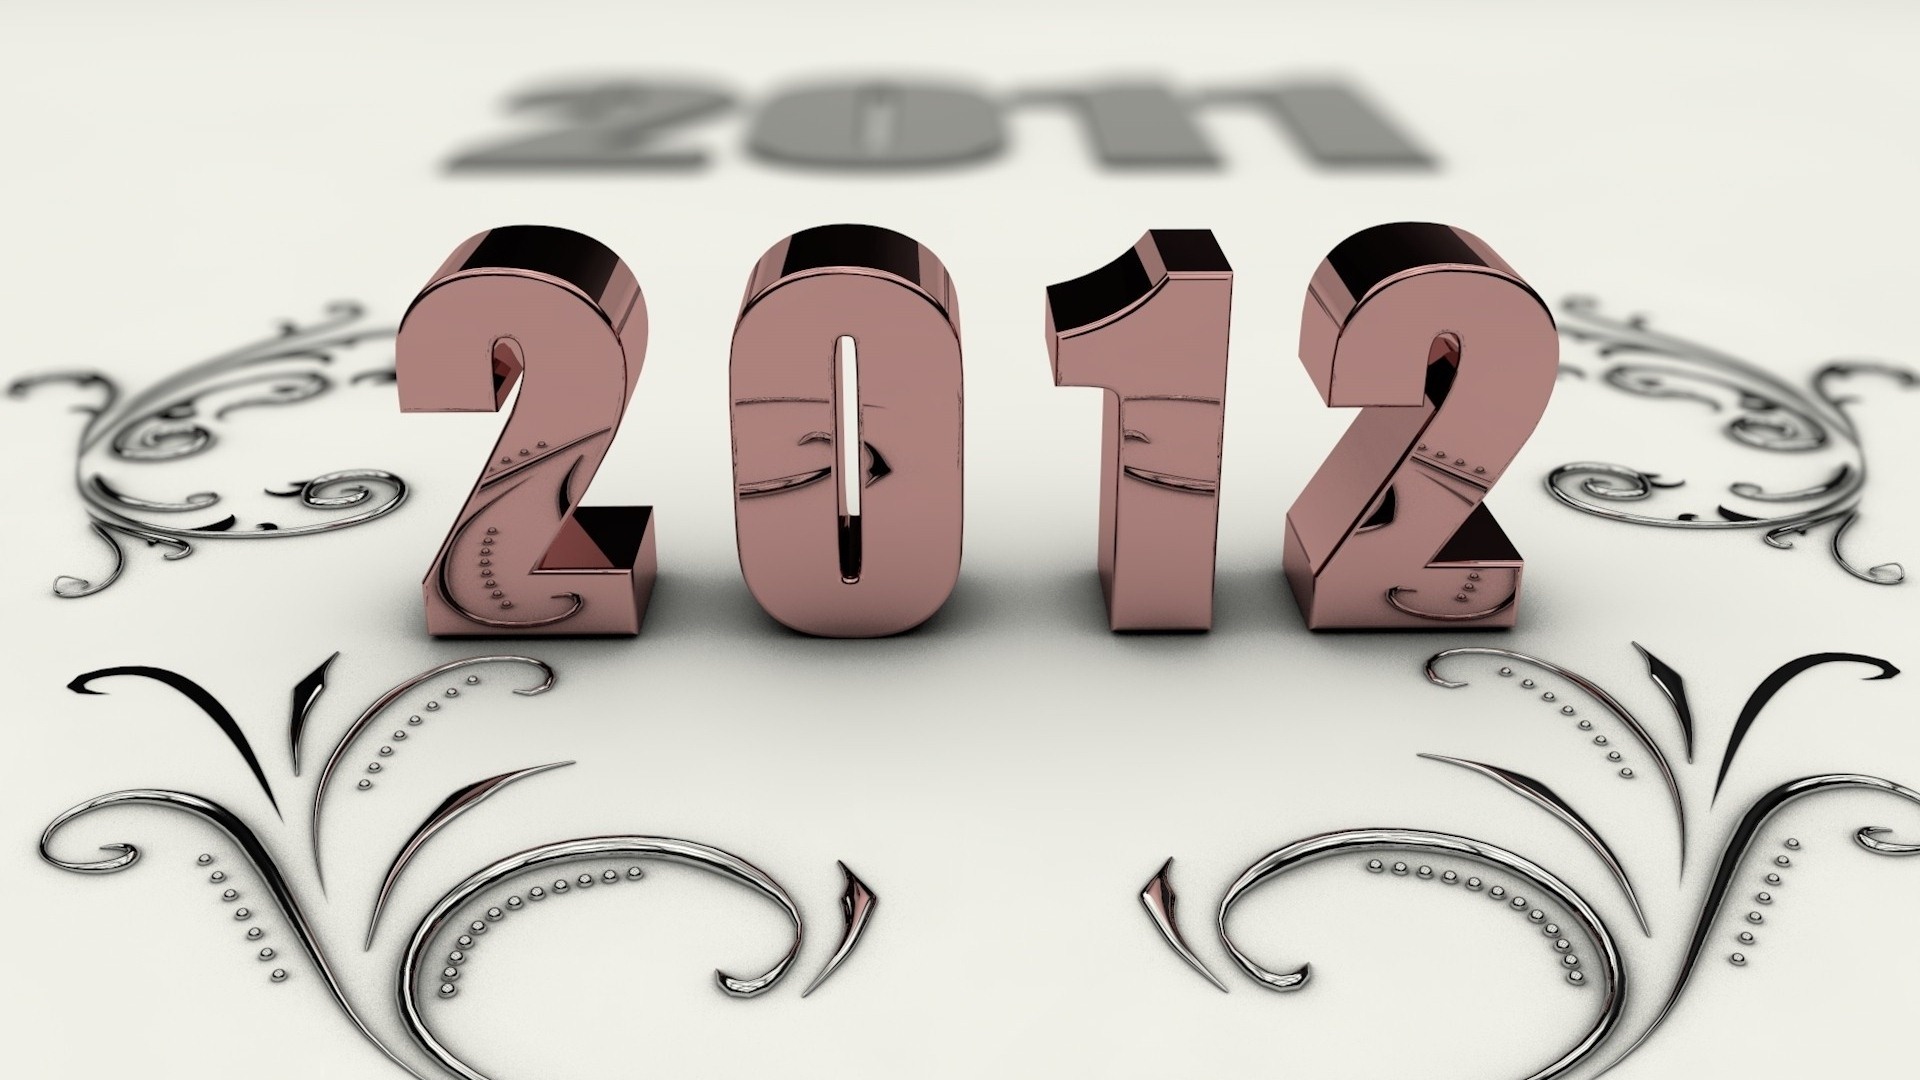 2012 New Year wallpapers (1) #8 - 1920x1080